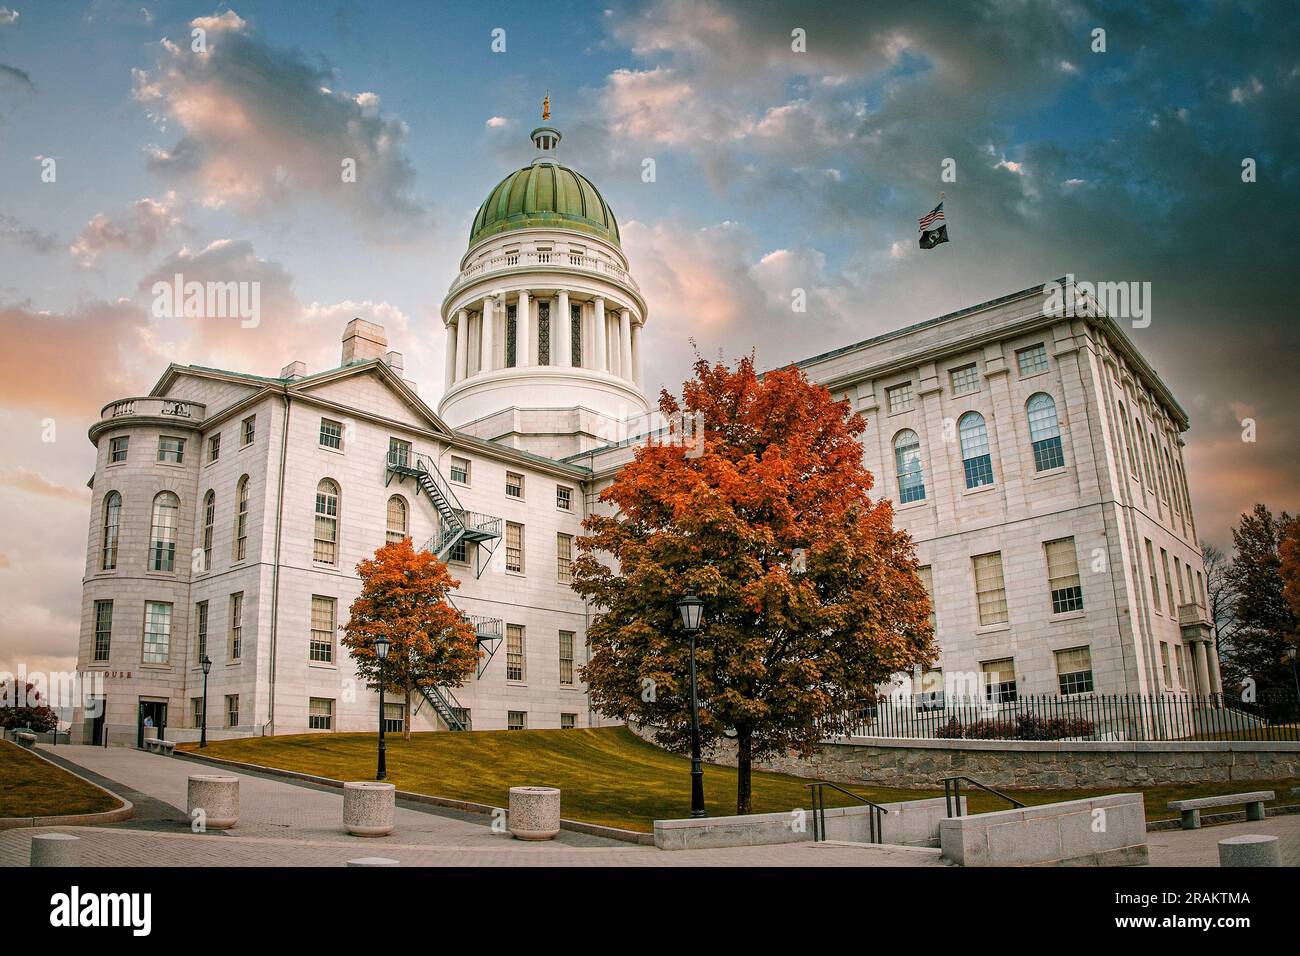 The State Capitol in Augusta, Maine, the 23rd state admitted to the United States in March of 1820. Stock Photo